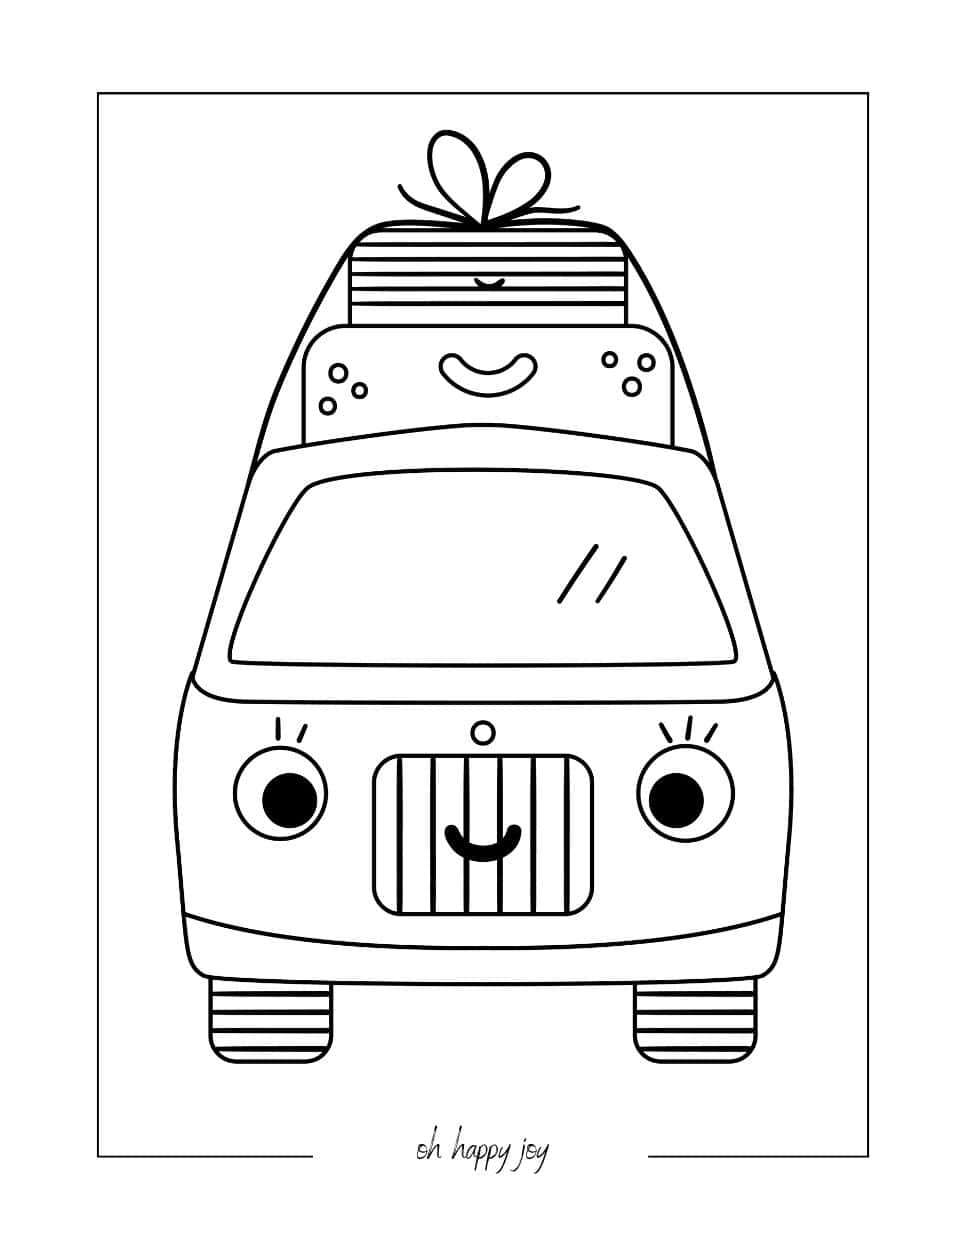 cute camping car coloring page